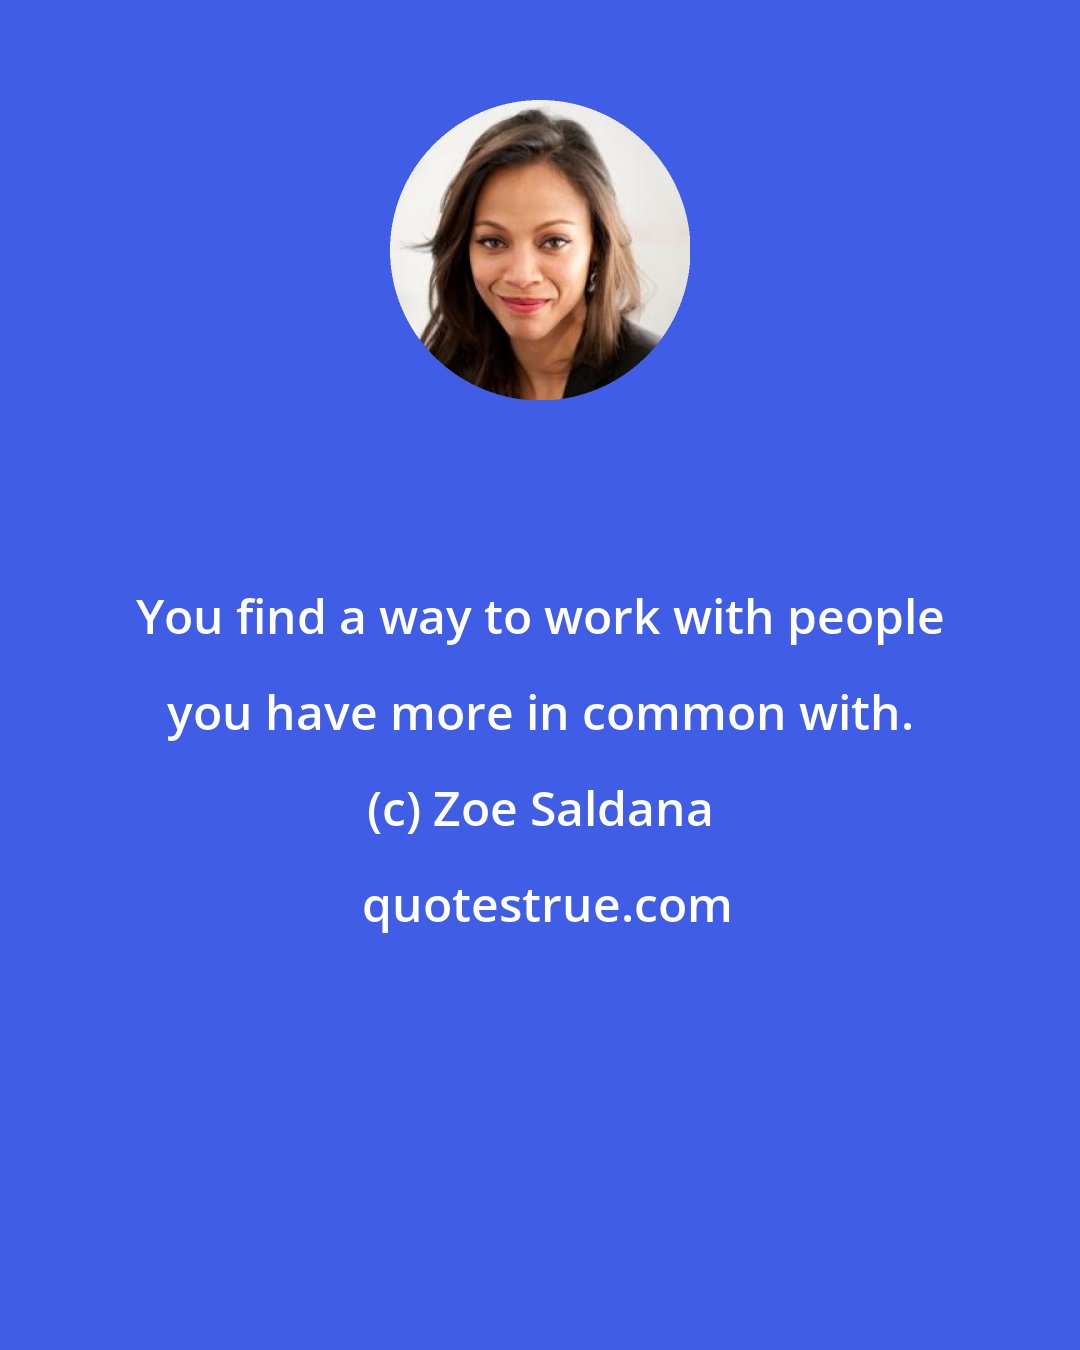 Zoe Saldana: You find a way to work with people you have more in common with.